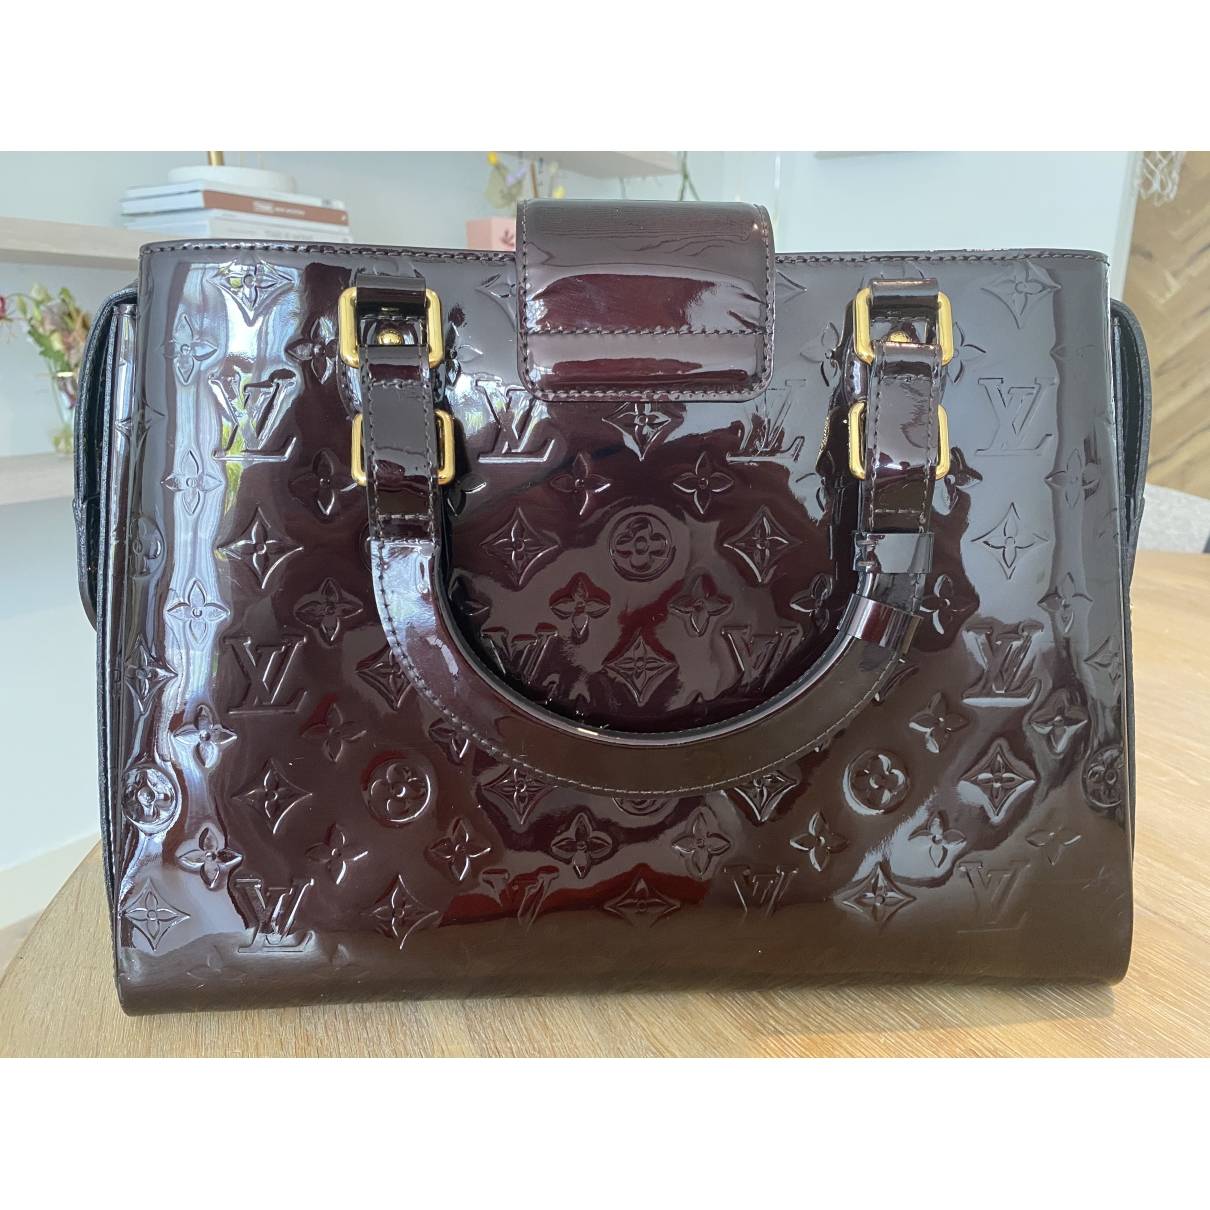 Louis Vuitton - Authenticated Melrose Handbag - Patent Leather Burgundy Plain for Women, Very Good Condition